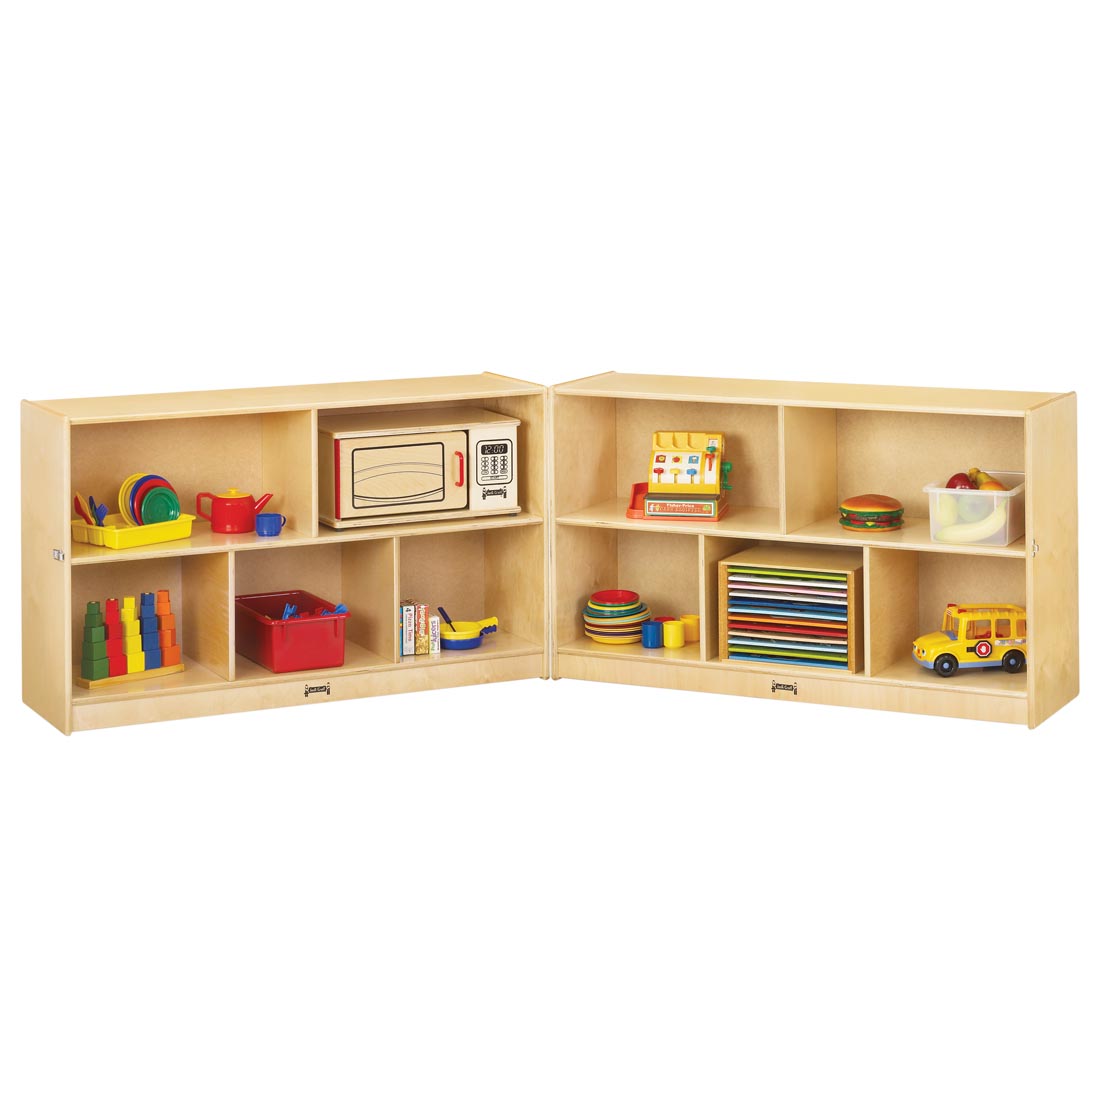 Natural Birch Fold-n-Lock Low Shelving shown with suggested storage contents